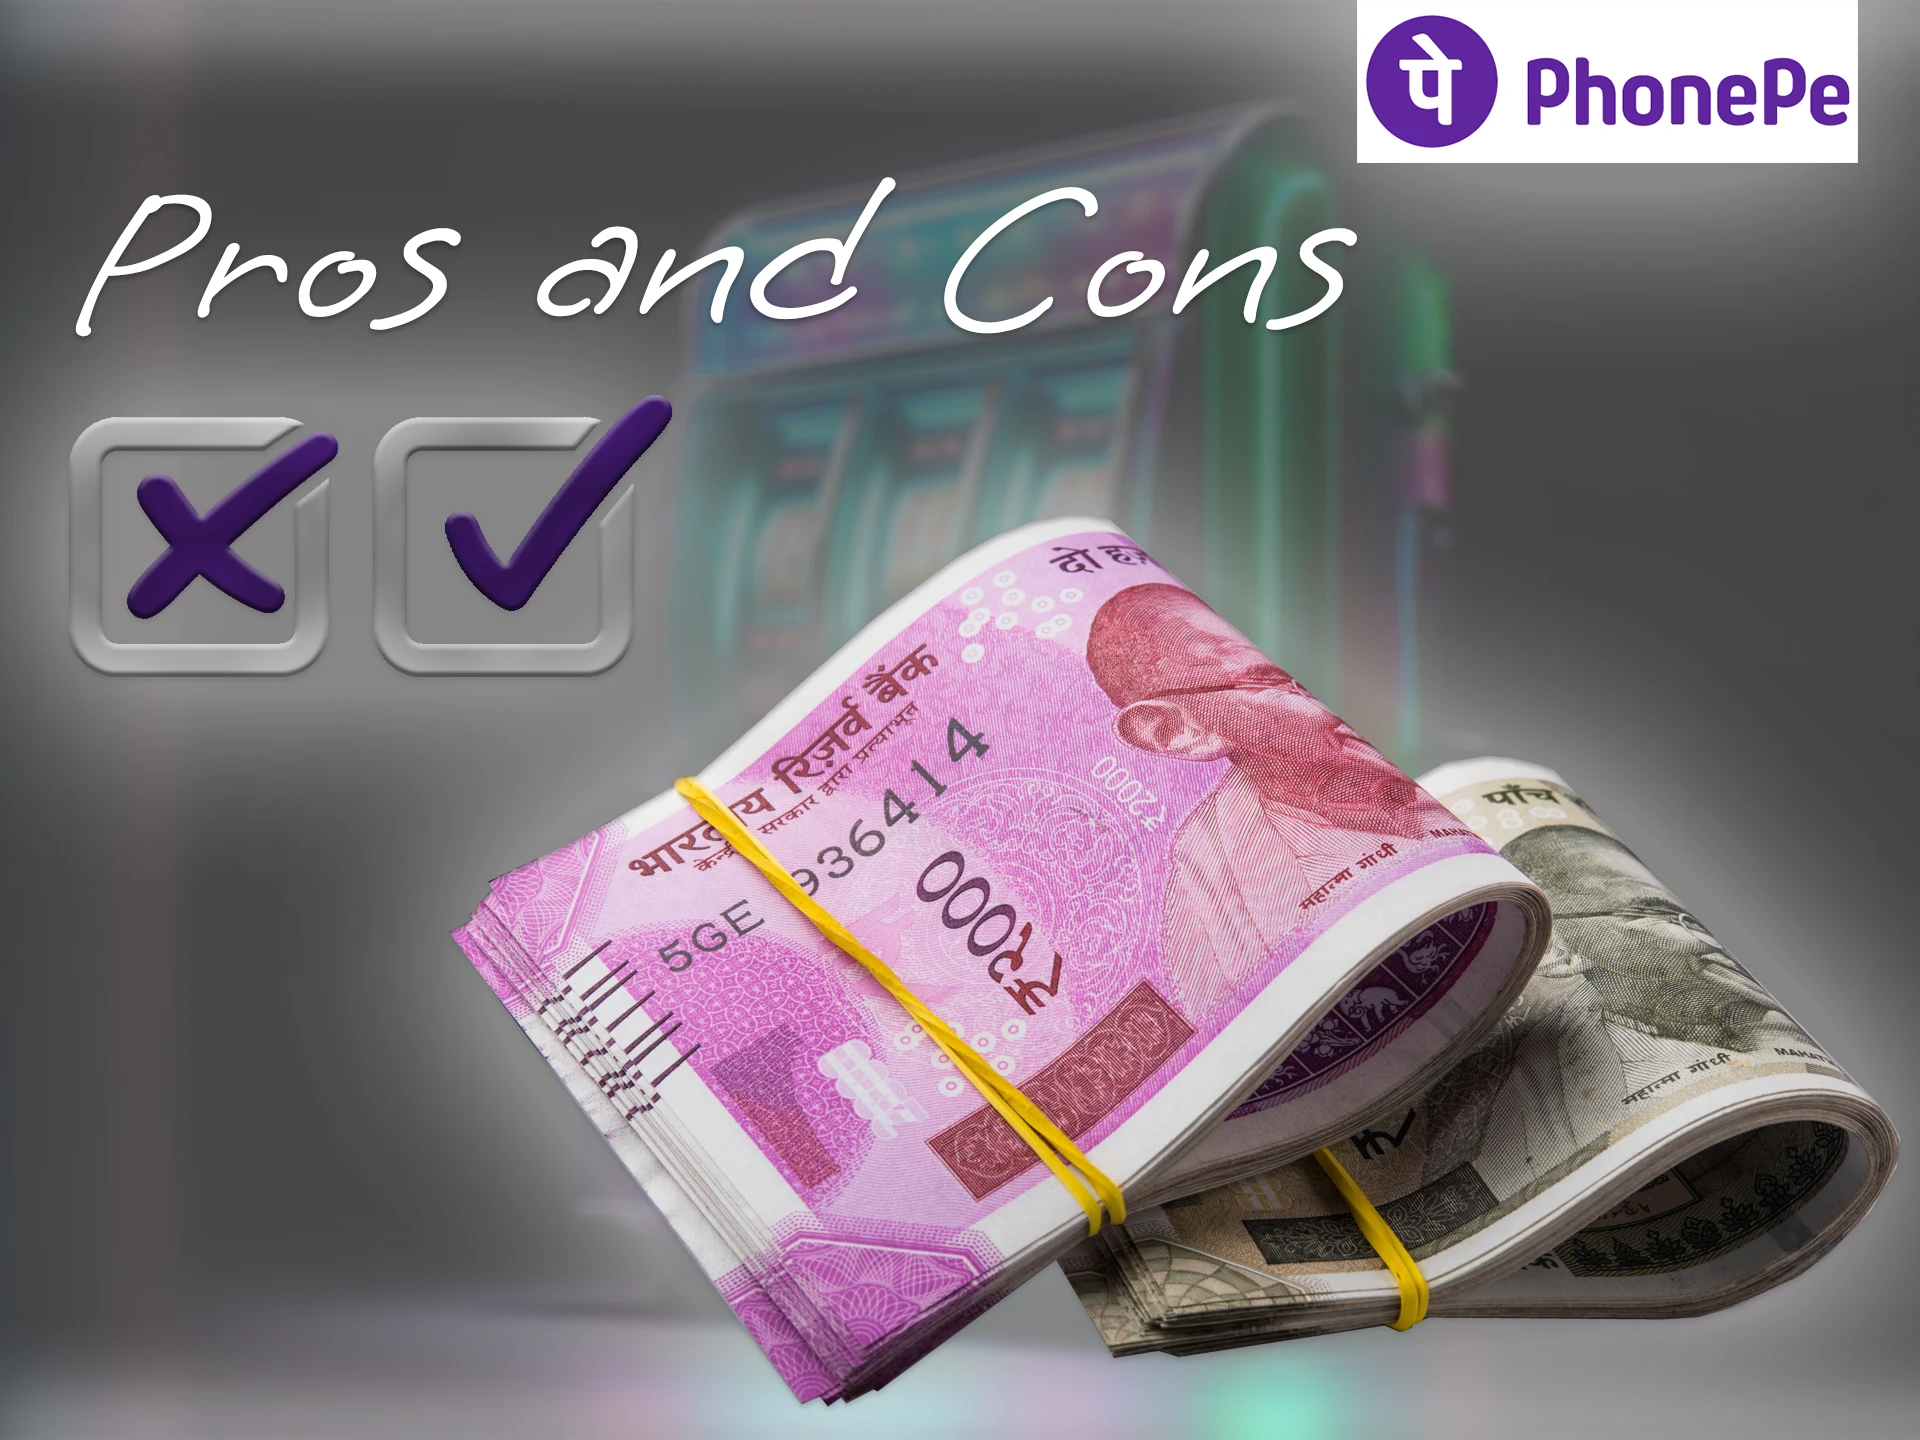 Familiarise yourself with the main pros and cons of PhonePe.